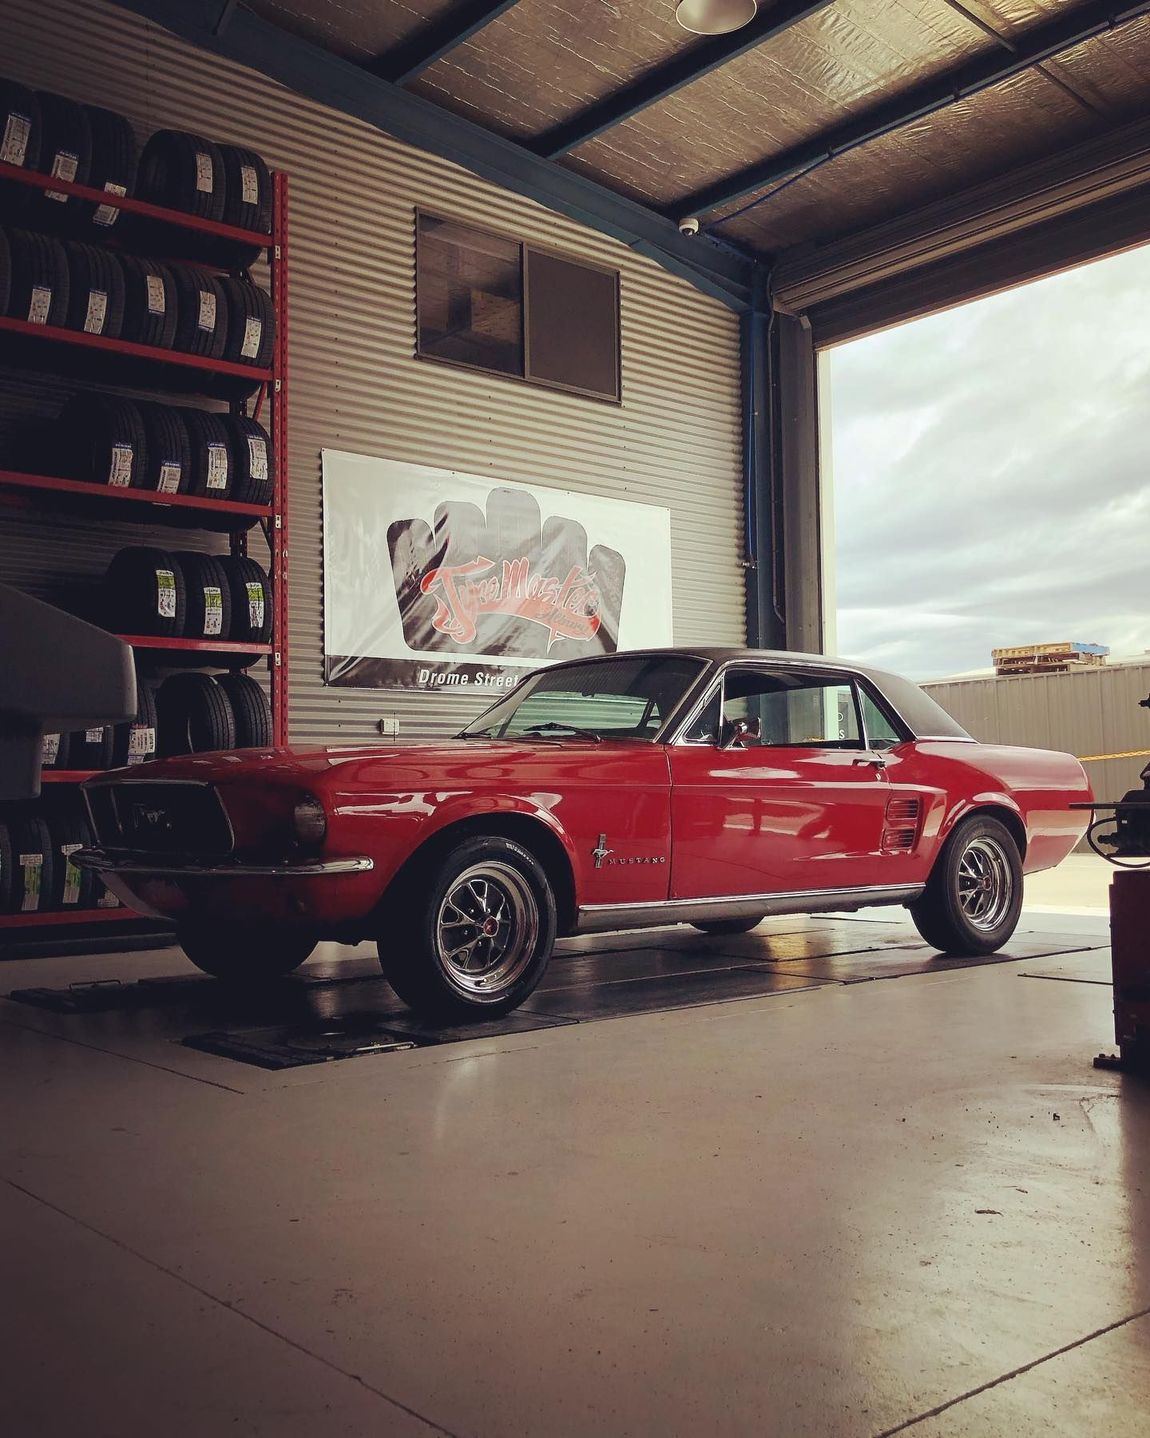 Slick '67 Mustang In Fresh Tyres And A Wheel Alignment — Tyre Shop in Albury, NSW